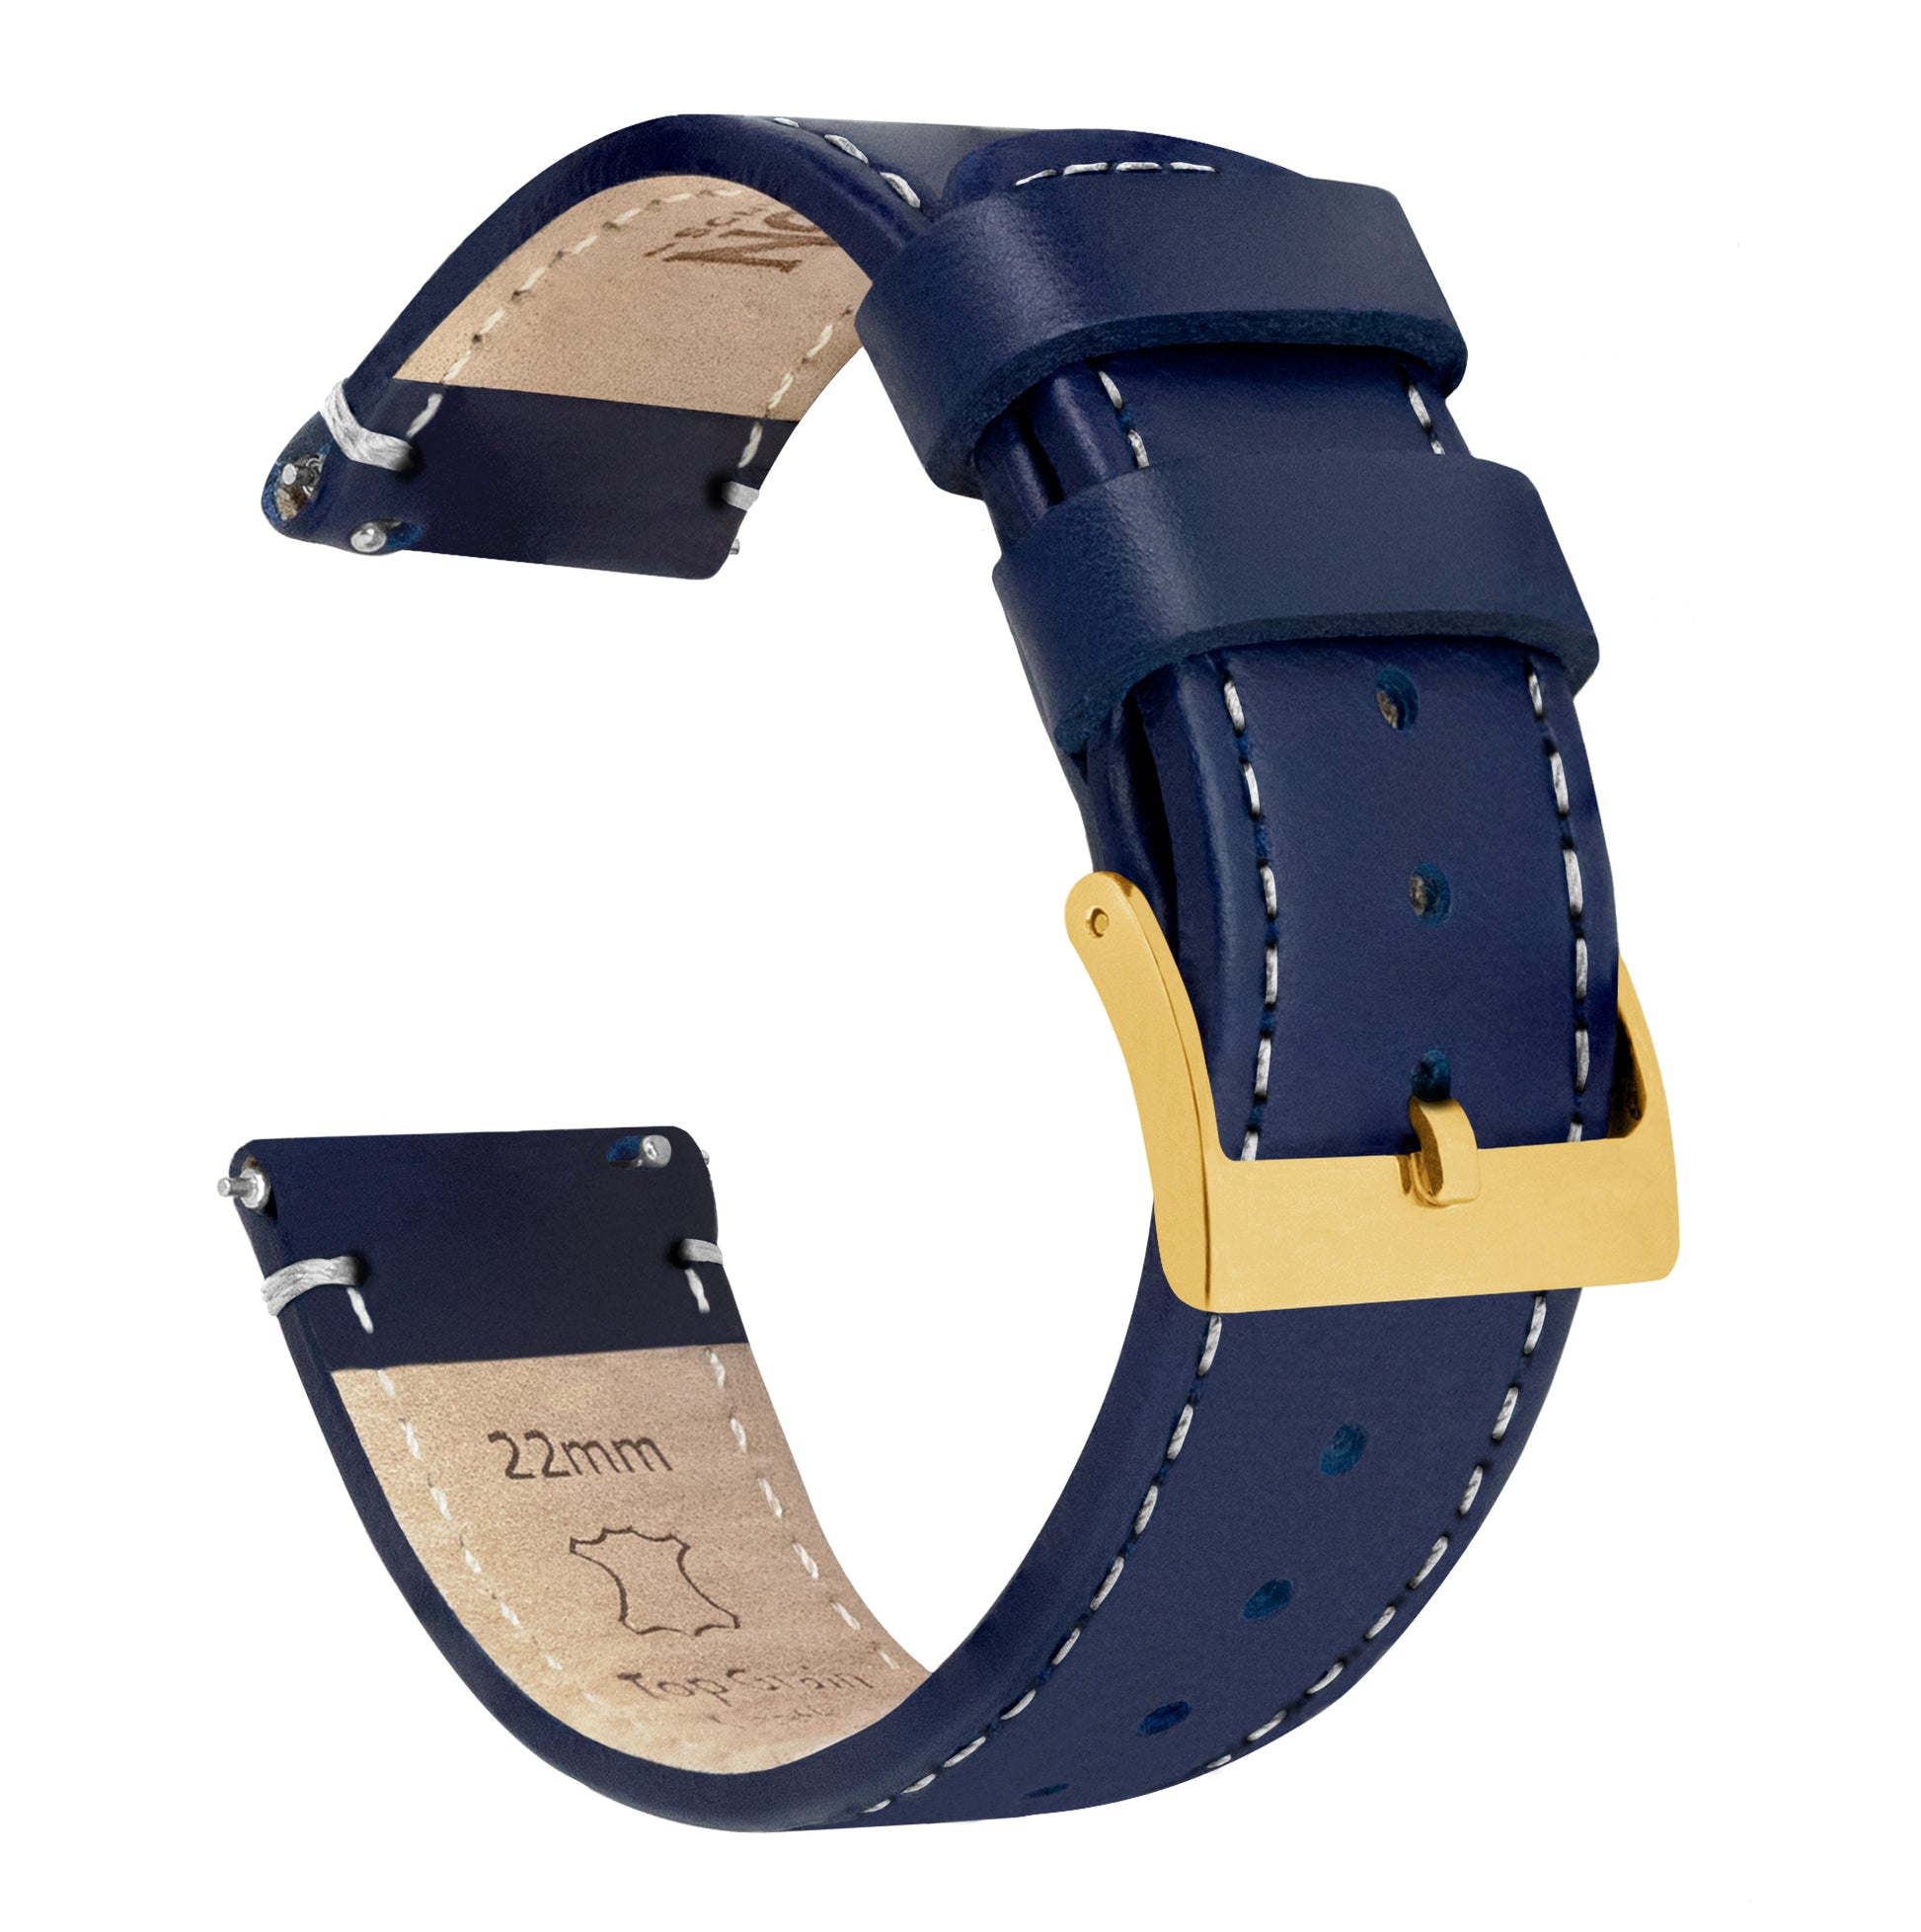 Navy Blue Leather | Linen Stitching - Barton Watch Bands